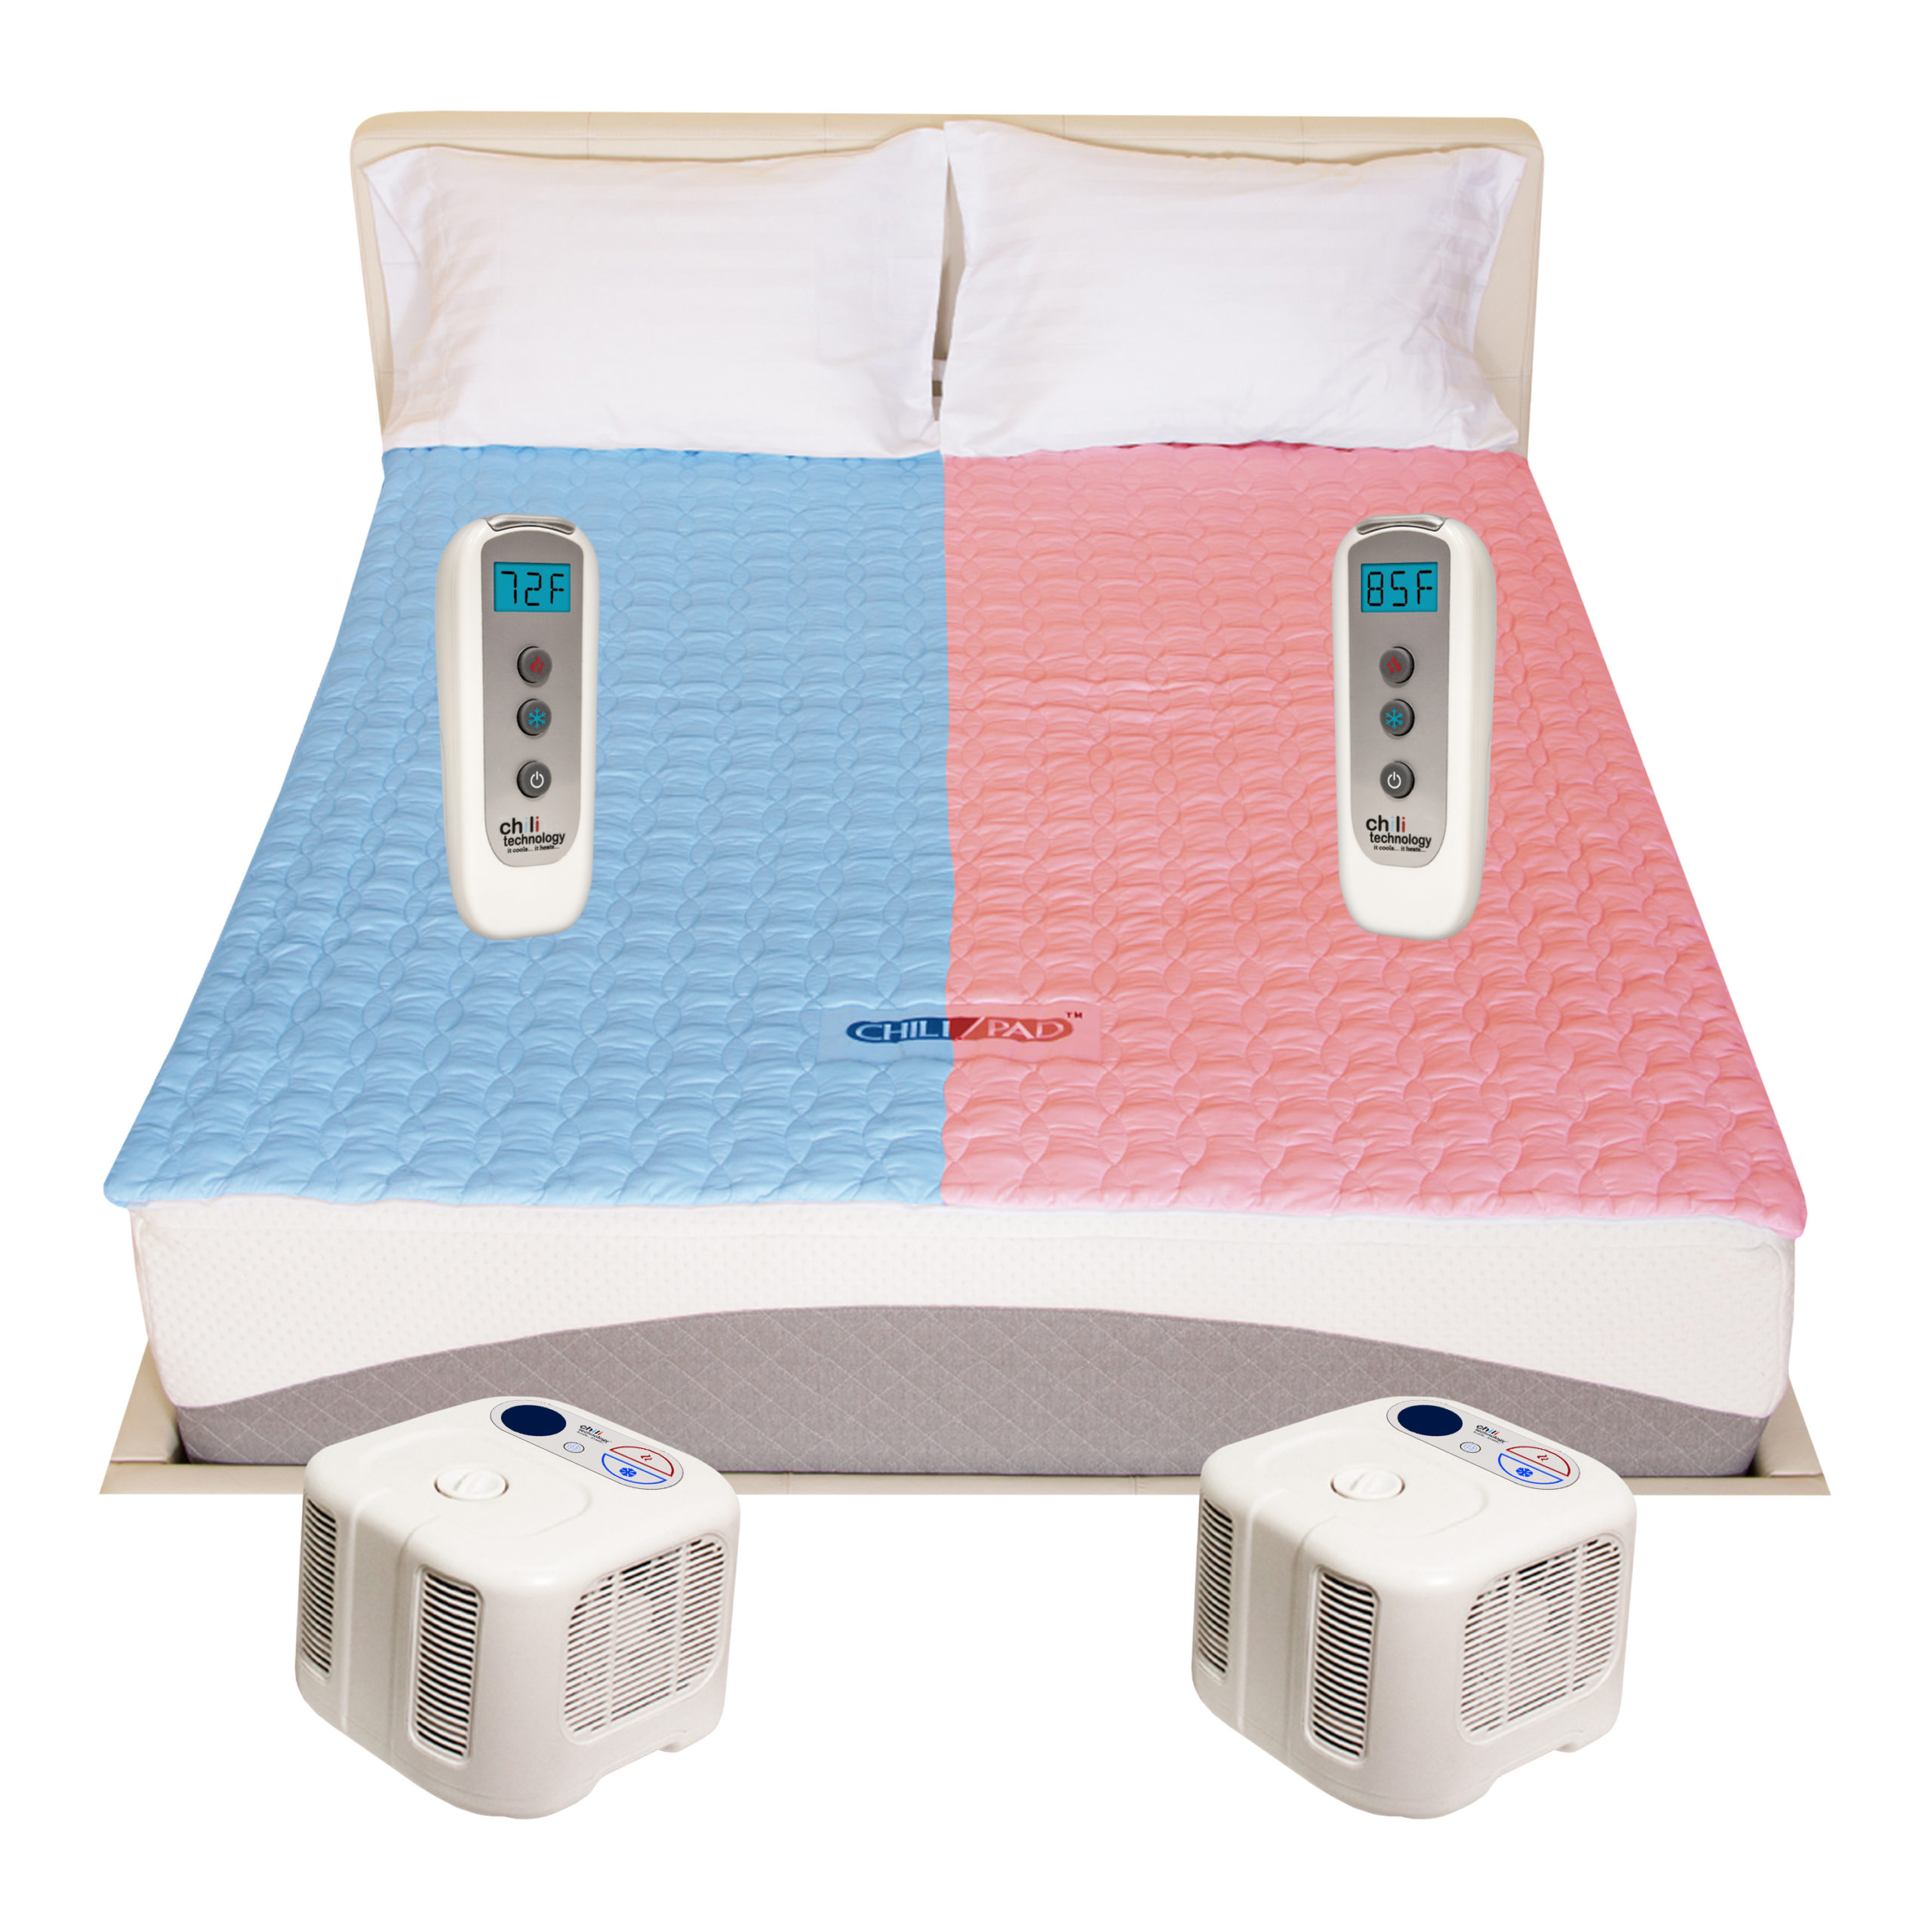 Do You Have Hot Flashes When Pregnant - Chilipad|Temperature|Mattress|Cube|Sleep|Bed|Water|System|Pad|Ooler|Control|Unit|Night|Bedjet|Technology|Side|Air|Product|Review|Body|Time|Degrees|Noise|Price|Pod|Tubes|Heat|Device|Cooling|Room|King|App|Features|Size|Cover|Sleepers|Sheets|Energy|Warranty|Quality|Mattress Pad|Control Unit|Cube Sleep System|Sleep Pod|Distilled Water|Remote Control|Sleep System|Desired Temperature|Water Tank|Chilipad Cube|Chili Technology|Deep Sleep|Pro Cover|Ooler Sleep System|Hydrogen Peroxide|Cool Mesh|Sleep Temperature|Fitted Sheet|Pod Pro|Sleep Quality|Smartphone App|Sleep Systems|Chilipad Sleep System|New Mattress|Sleep Trial|Full Refund|Mattress Topper|Body Heat|Air Flow|Chilipad Review